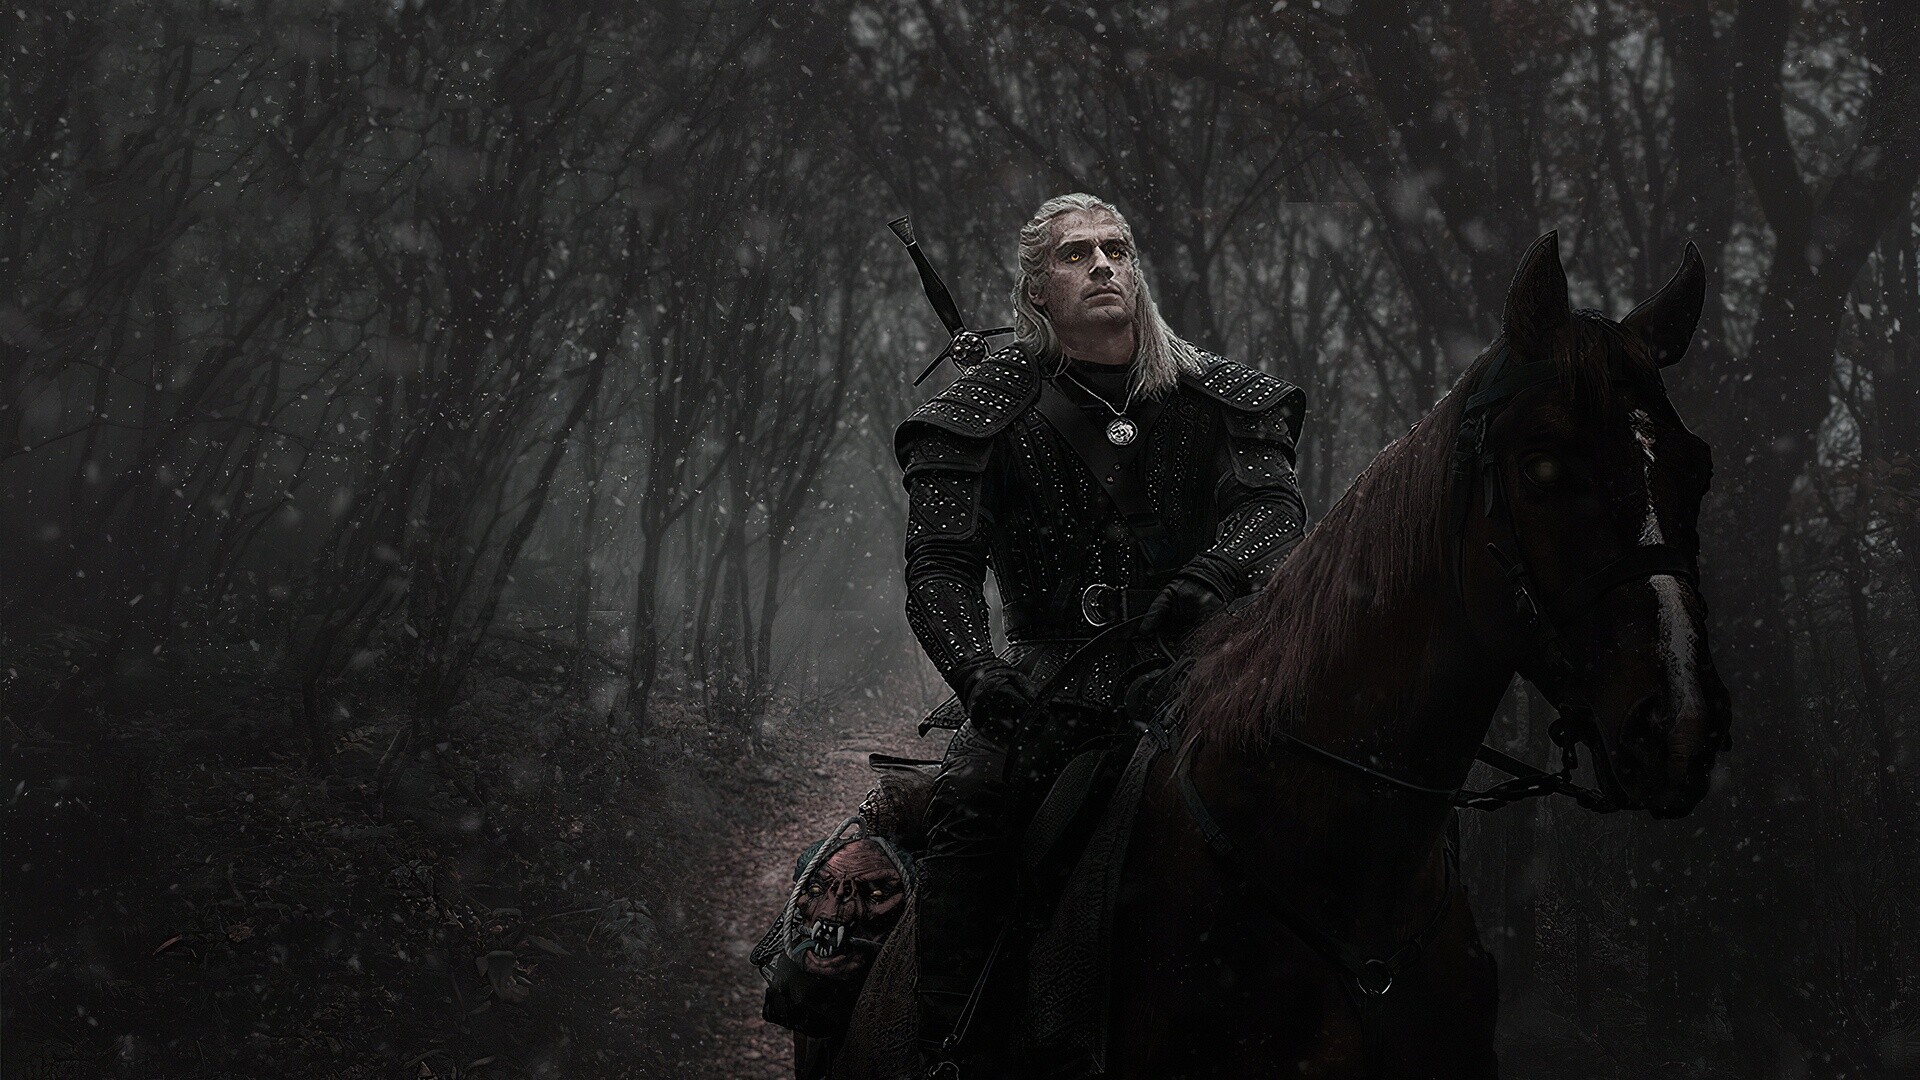 The Witcher (TV Series): The 2019 Netflix adaptation of Andrzej Sapkowski's much-loved book series. 1920x1080 Full HD Wallpaper.